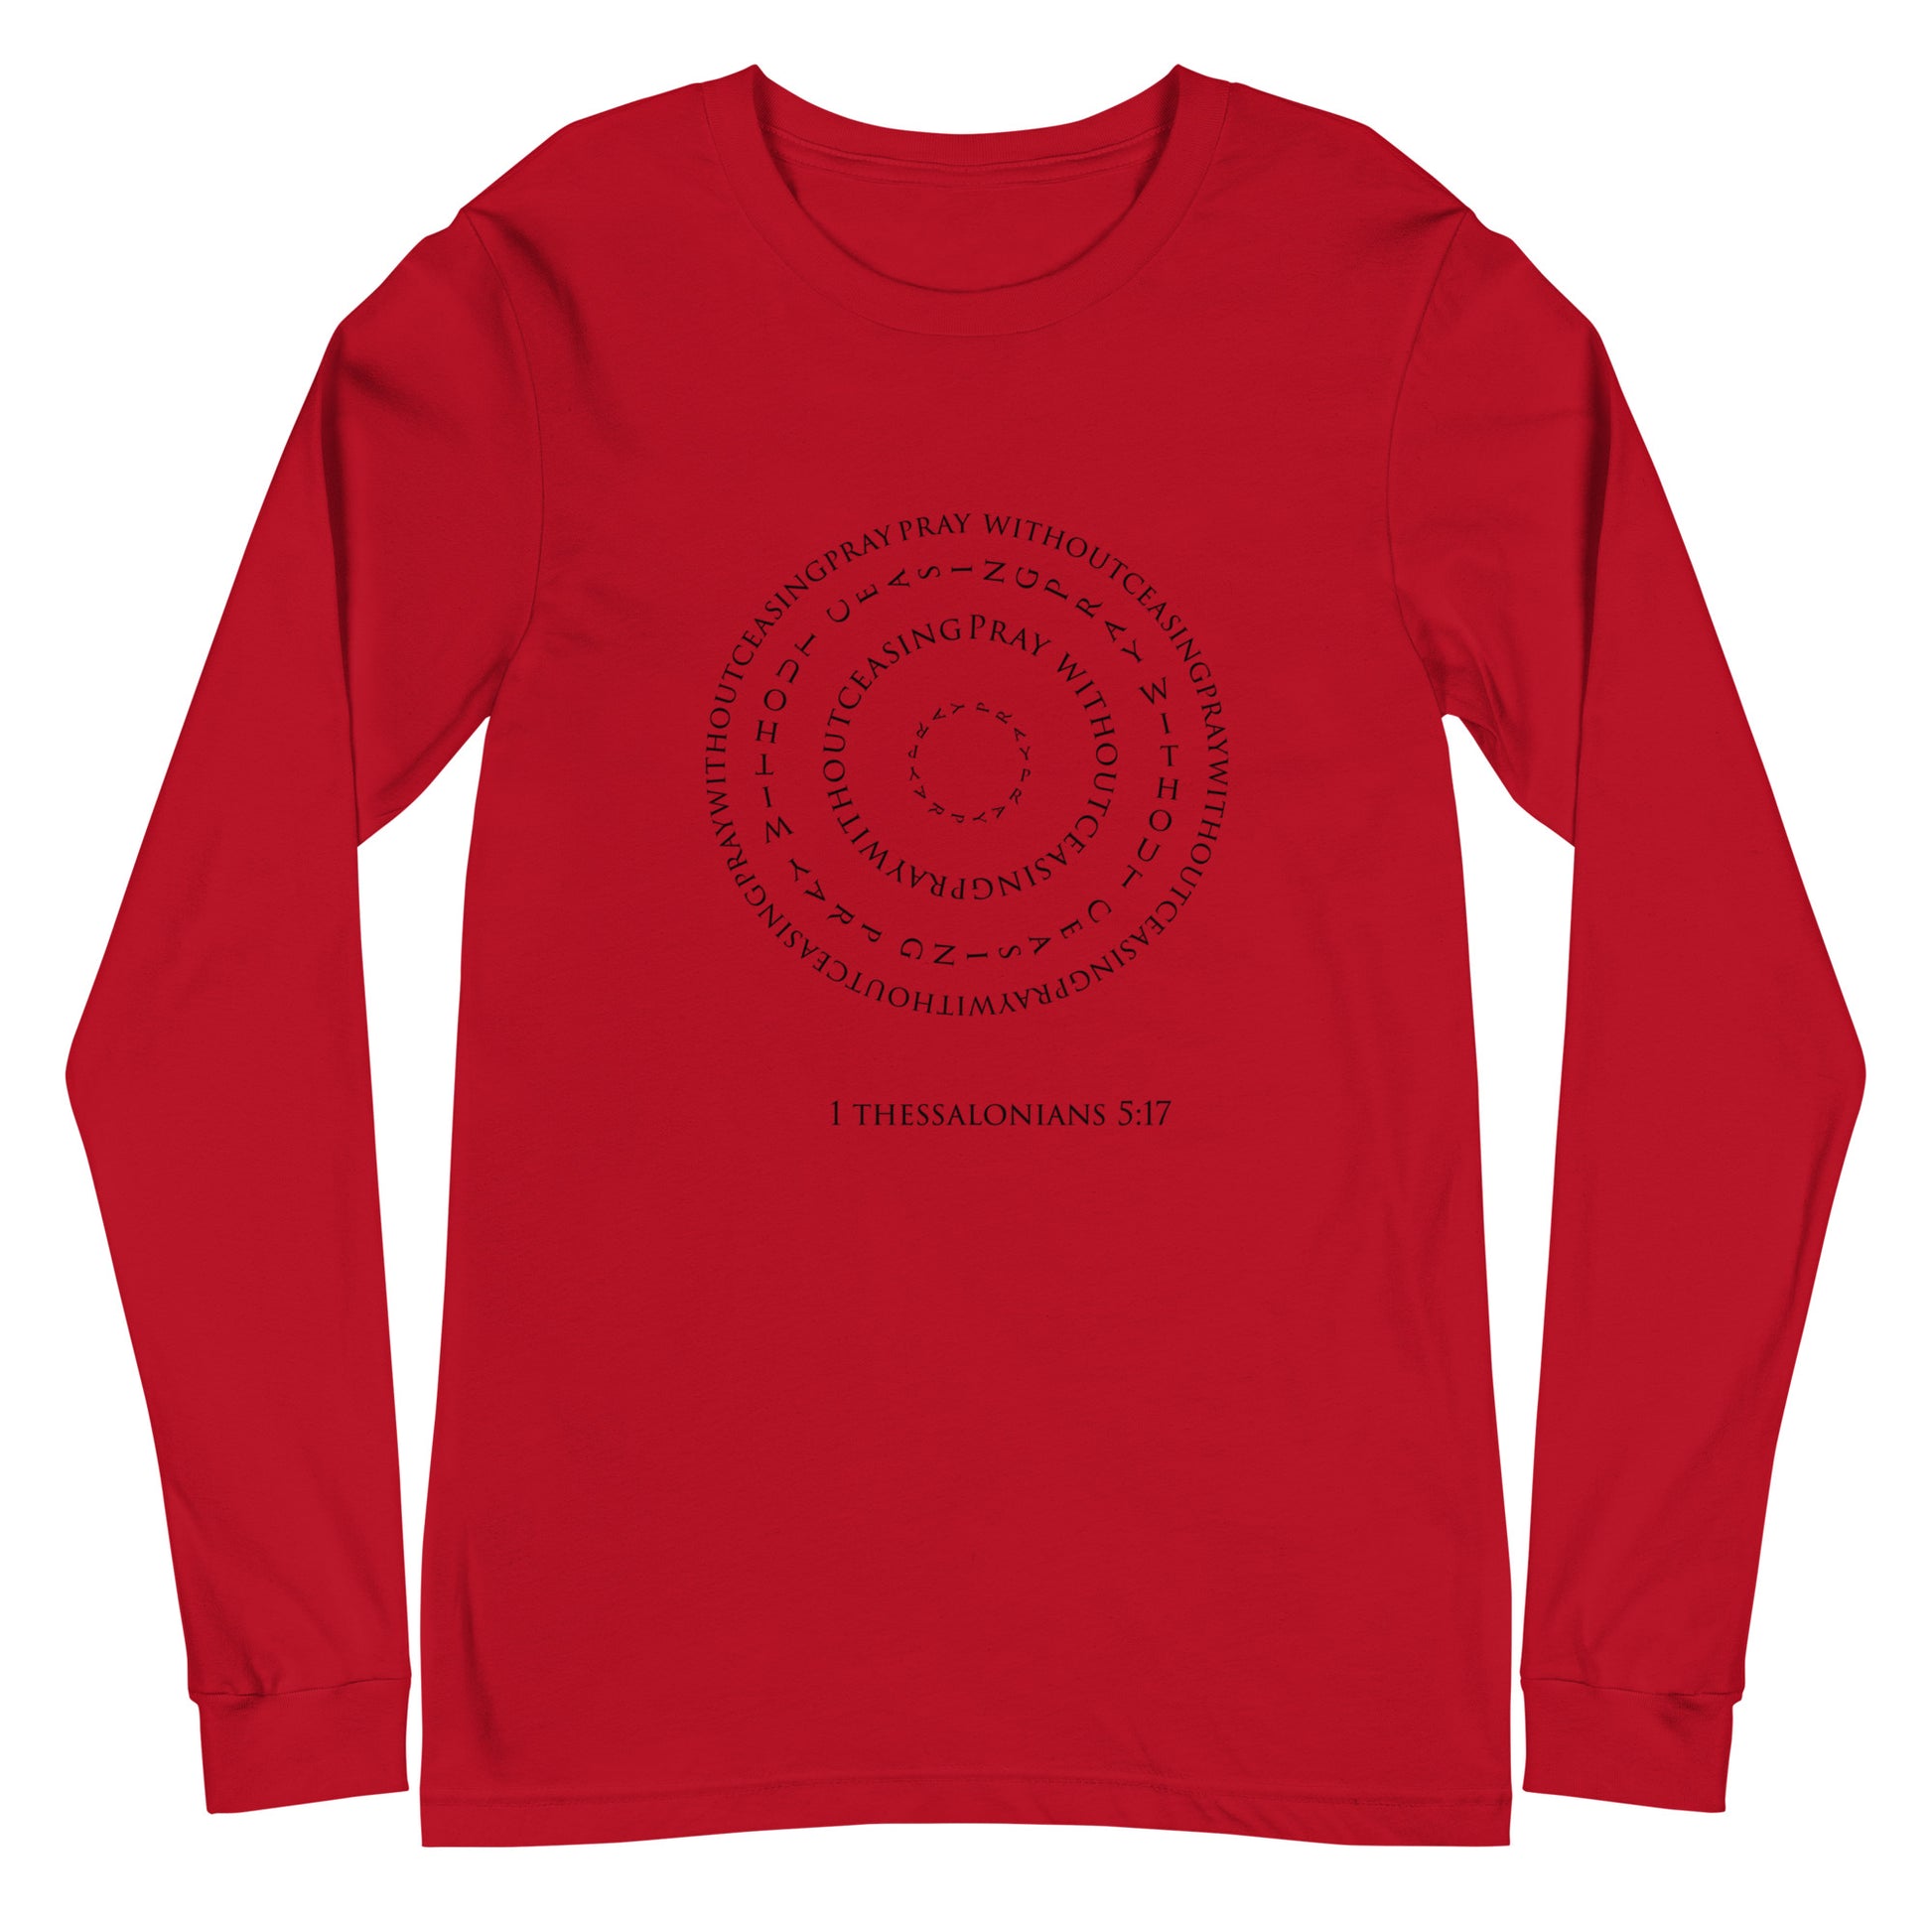 Graphic Christian red long-sleeve tee with 1 Thessalonians 5:17 on it. This piece of Christian apparel is a reminder the power of prayer. Grab this unique long-sleeve tee from the Christian-based company Olive Grove Life.